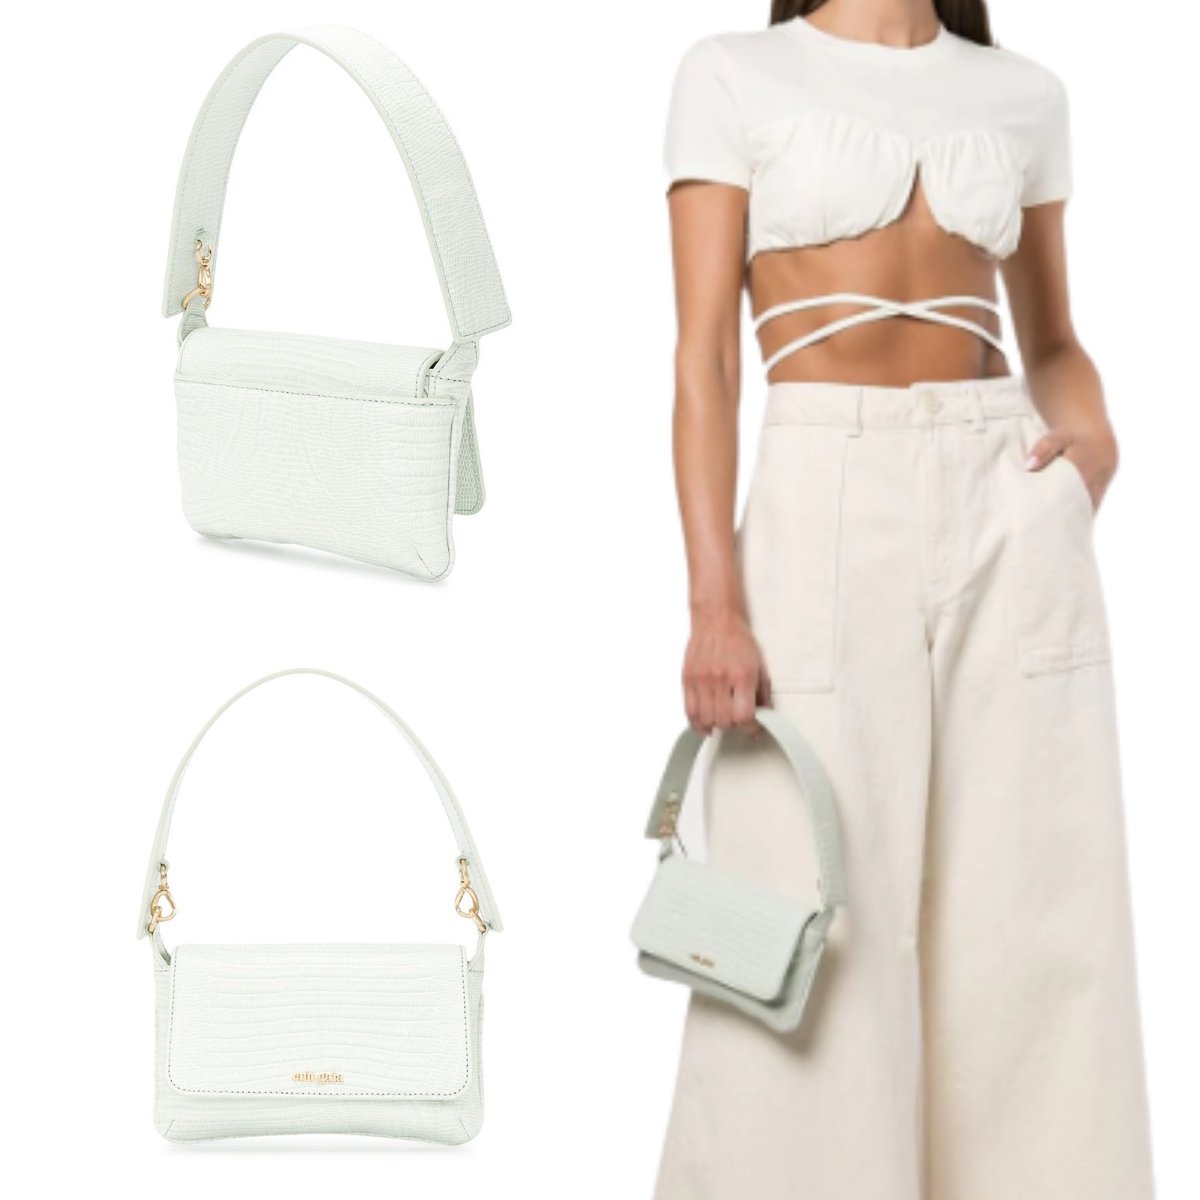 Cult Gaia's raffia and pebble leather Damara Bag in Mint can be carried on the shoulder as a mini silhouette